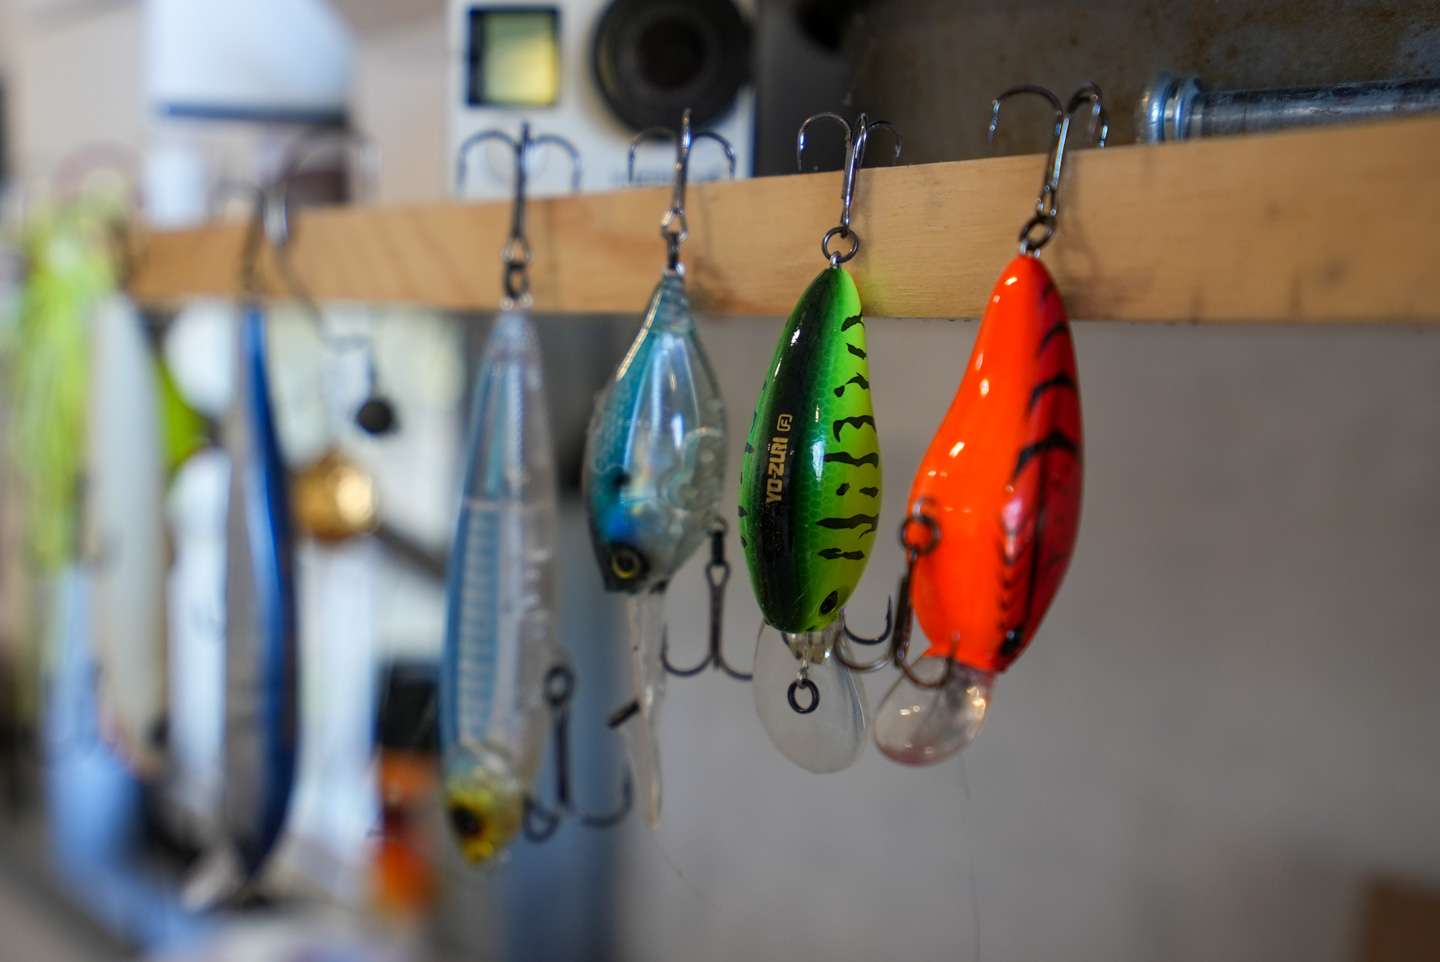 Like many Elite Series pros, Davis has baits hanging all over the place. 